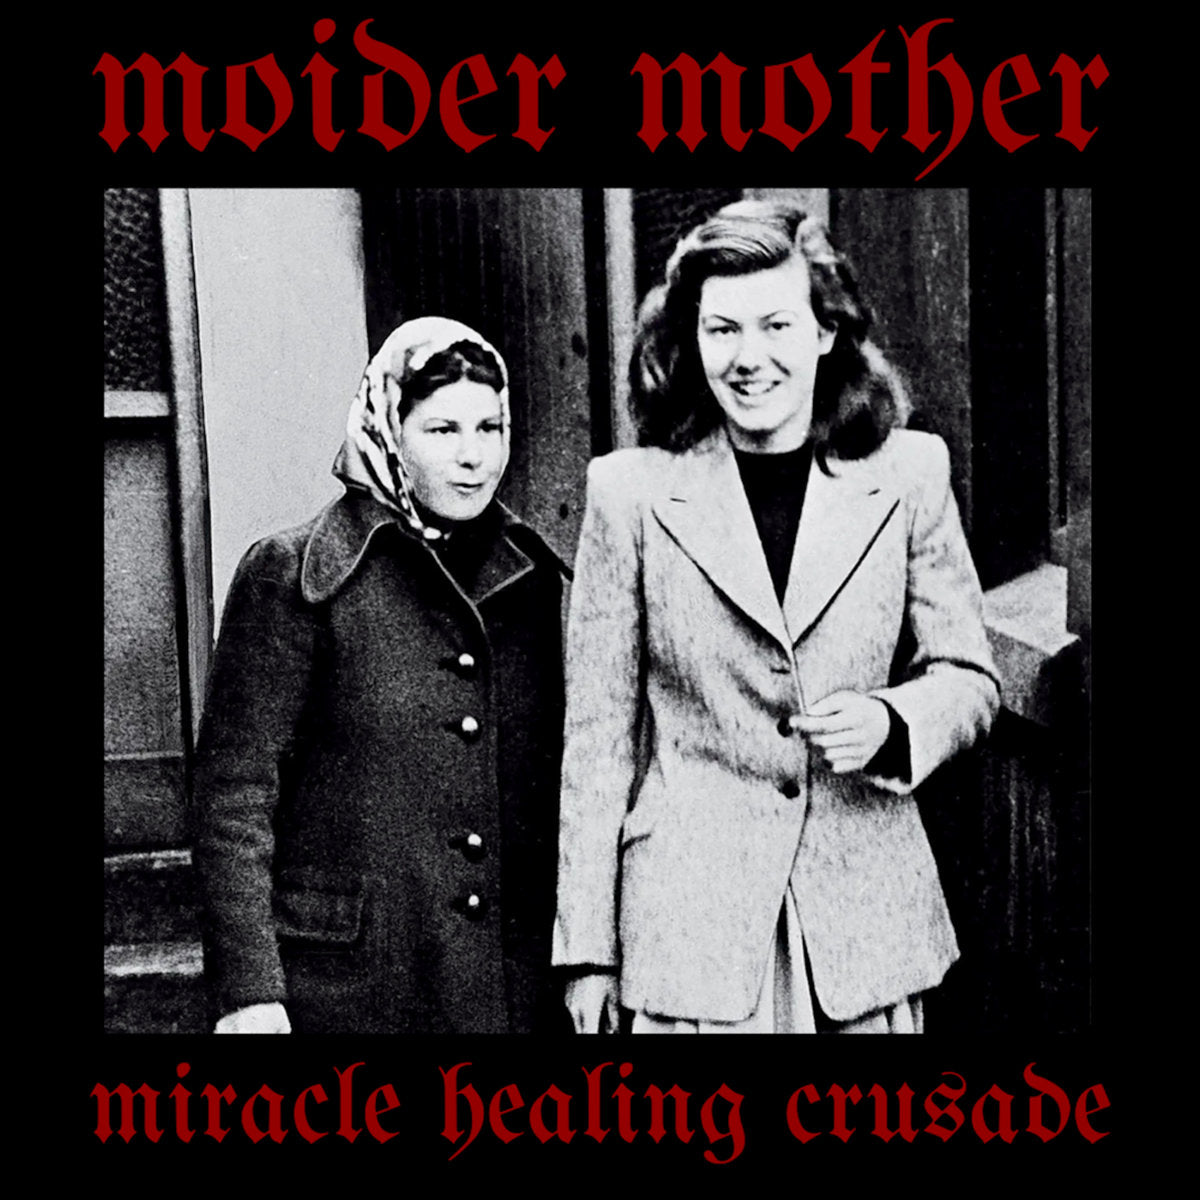 Moider Mother - Miracle Healing Crusade | Buy the Vinyl LP from Flying Nun Records